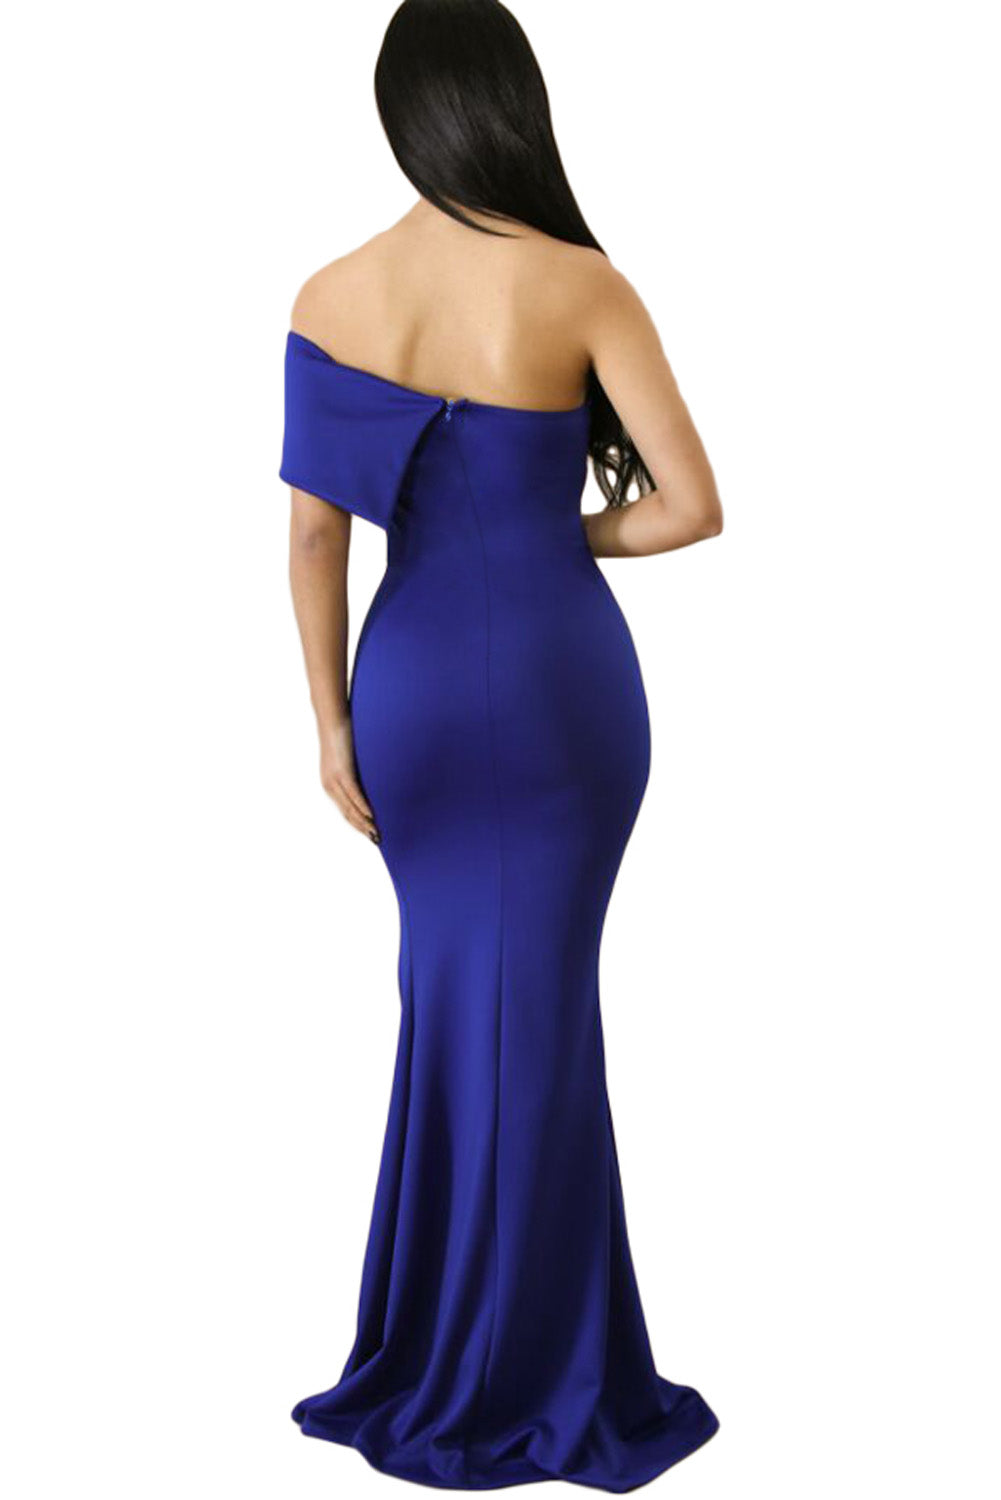 Blue Off The Shoulder One Sleeve Slit Maxi Party Prom Dress